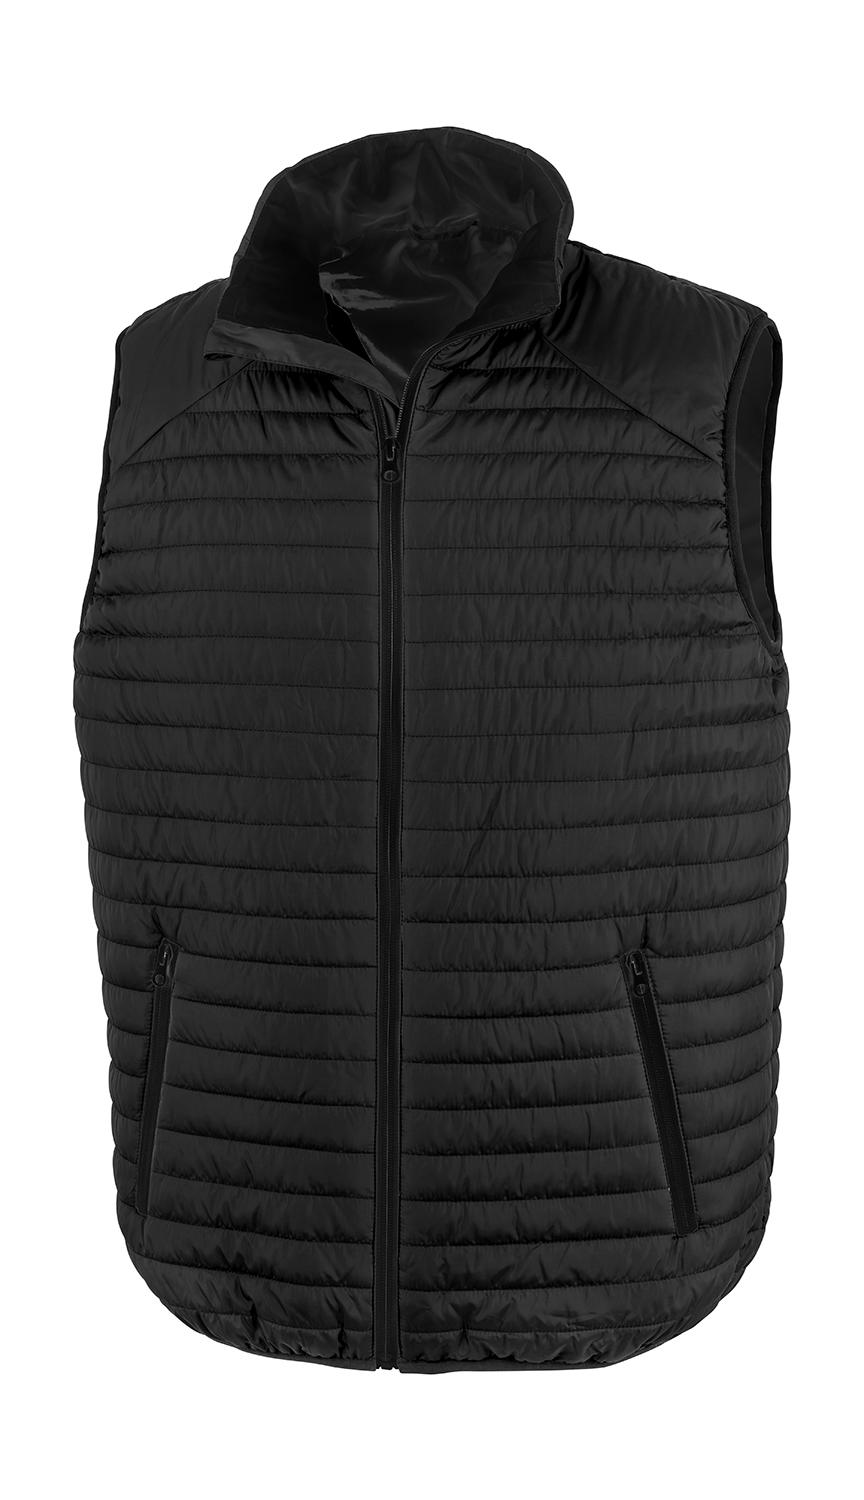  Thermoquilt Gilet in Farbe Black/Black